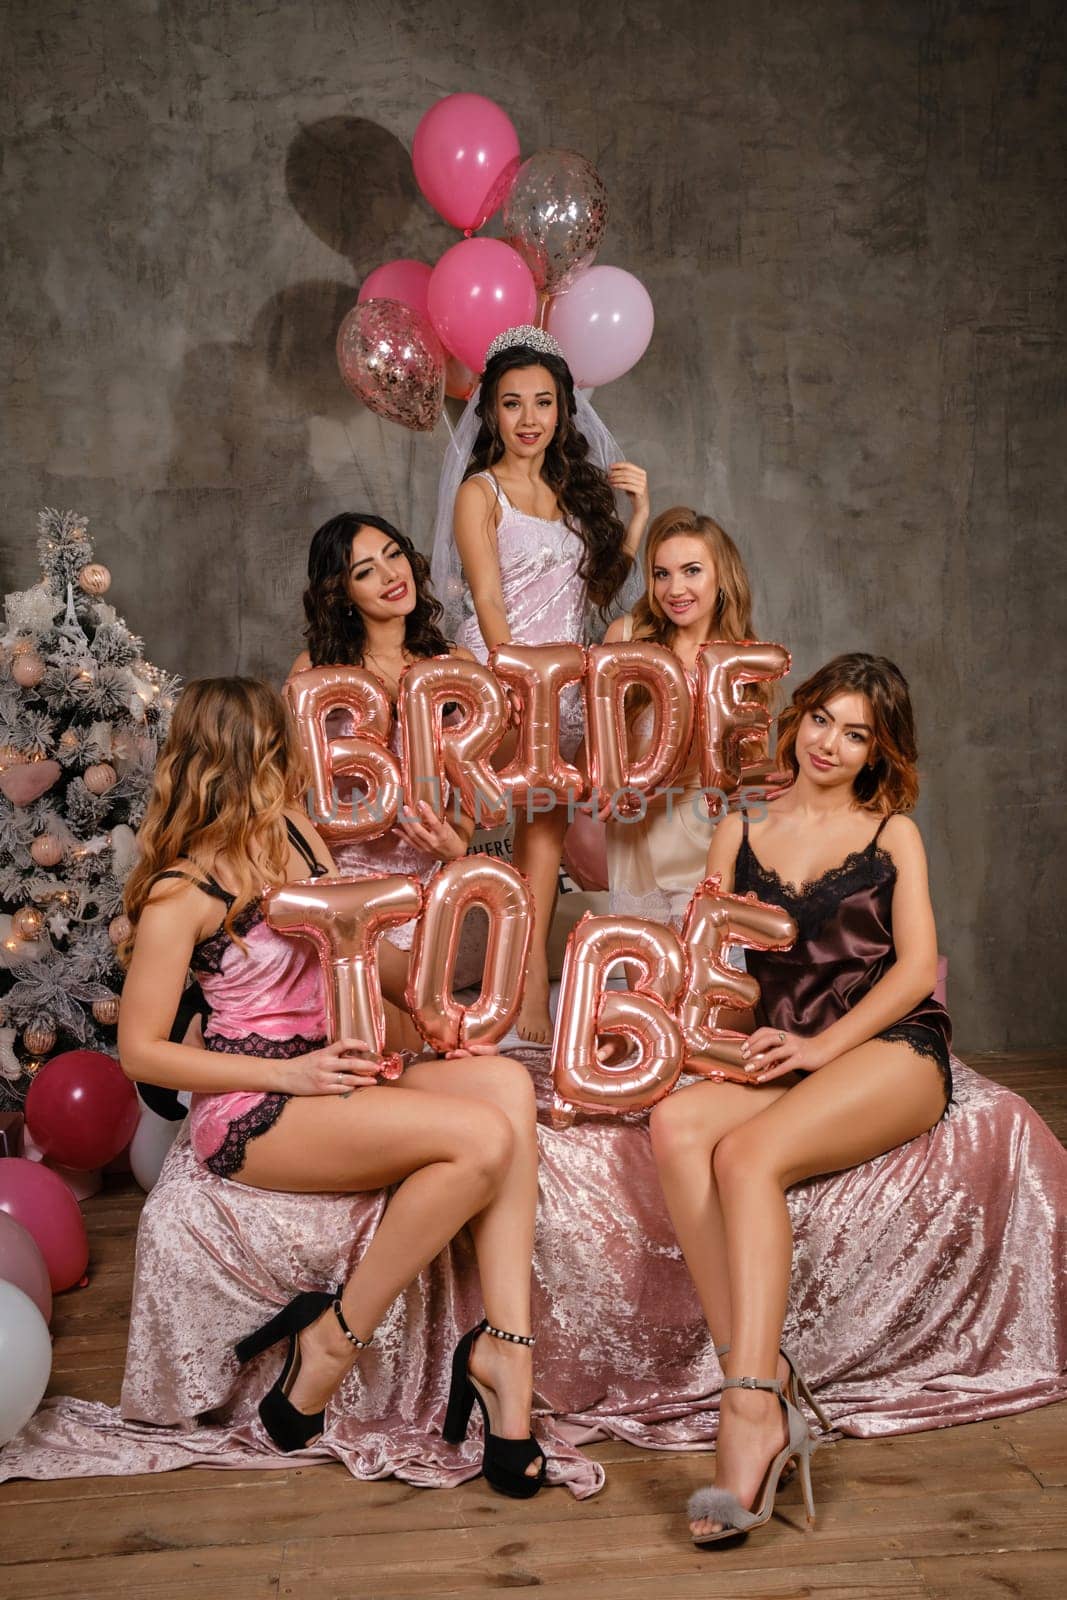 Charming maidens in sexy lingerie, bride in veil, enjoying hen-party, sitting on bed, smiling, holding balloons in form of letters, built sentence bride to be. Christmas tree, decorations. Close-up.